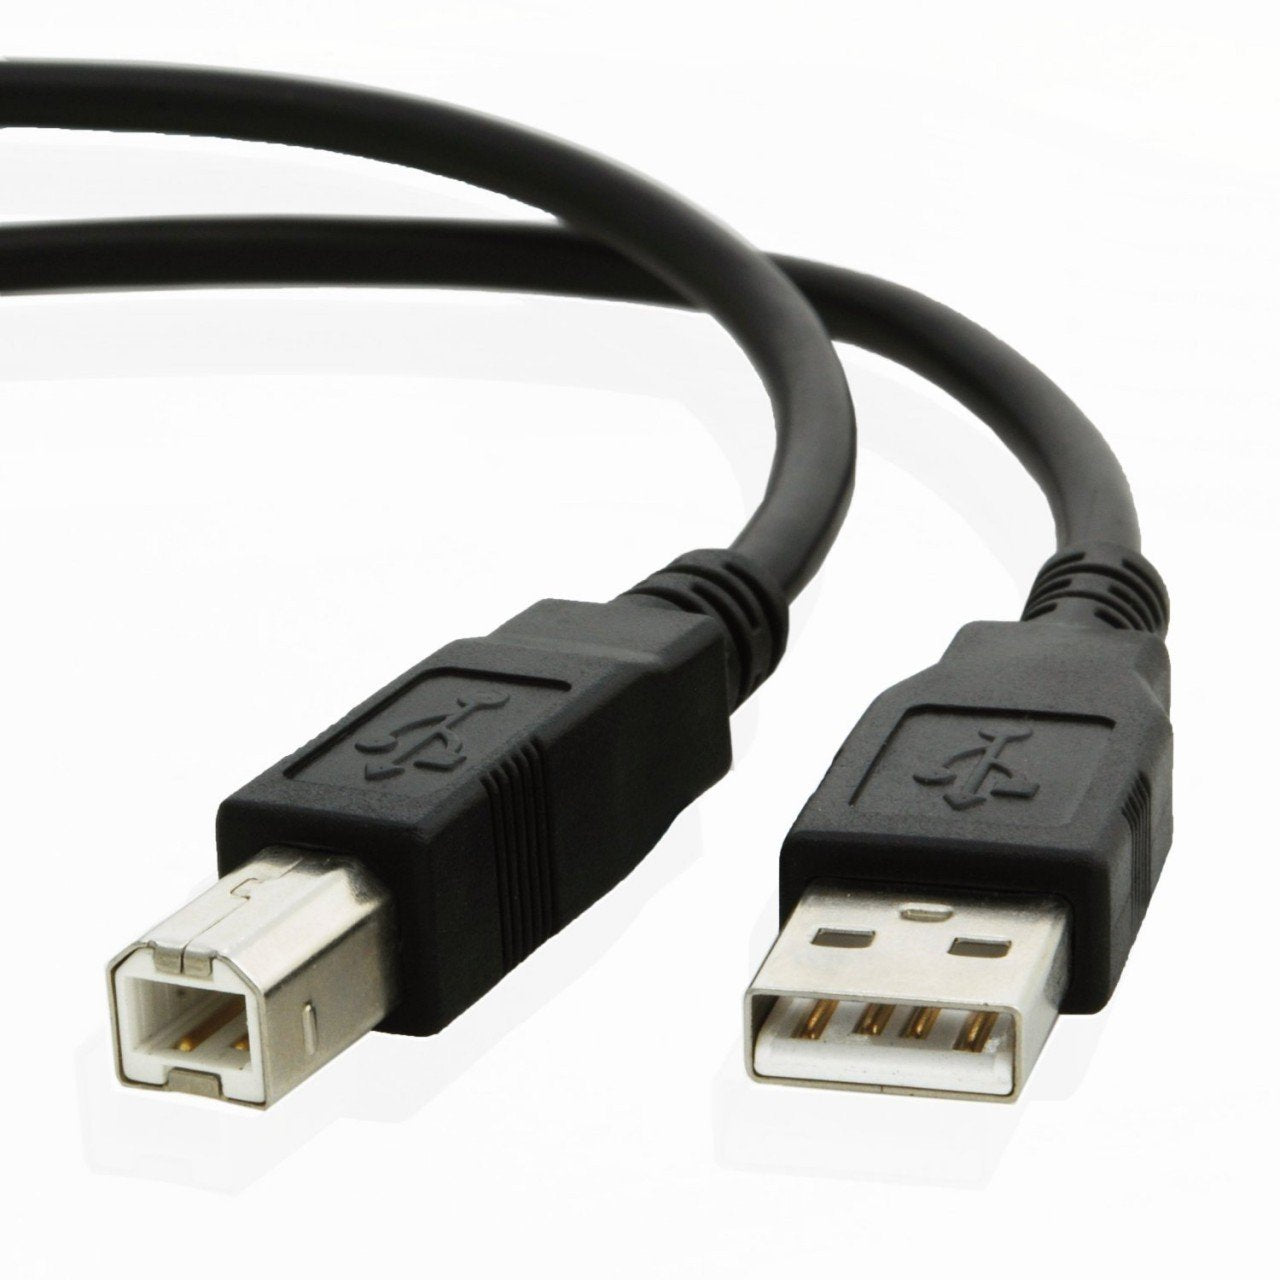 USB cable for Canon PIXMA MG2525